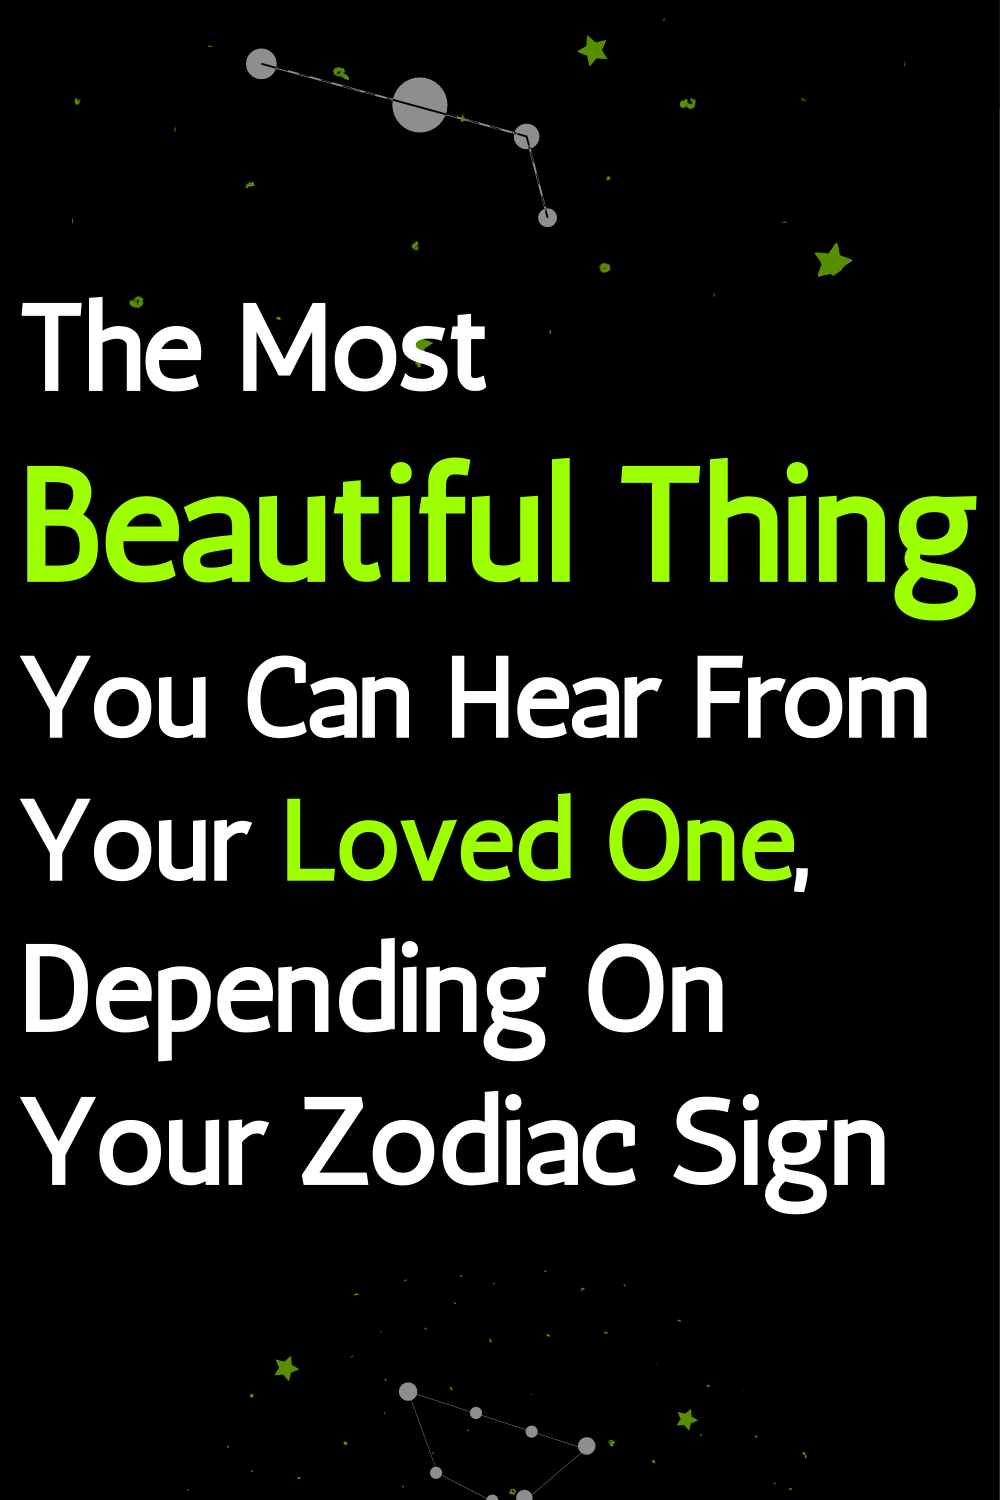 The Most Beautiful Thing You Can Hear From Your Loved One, Depending On Your Zodiac Sign